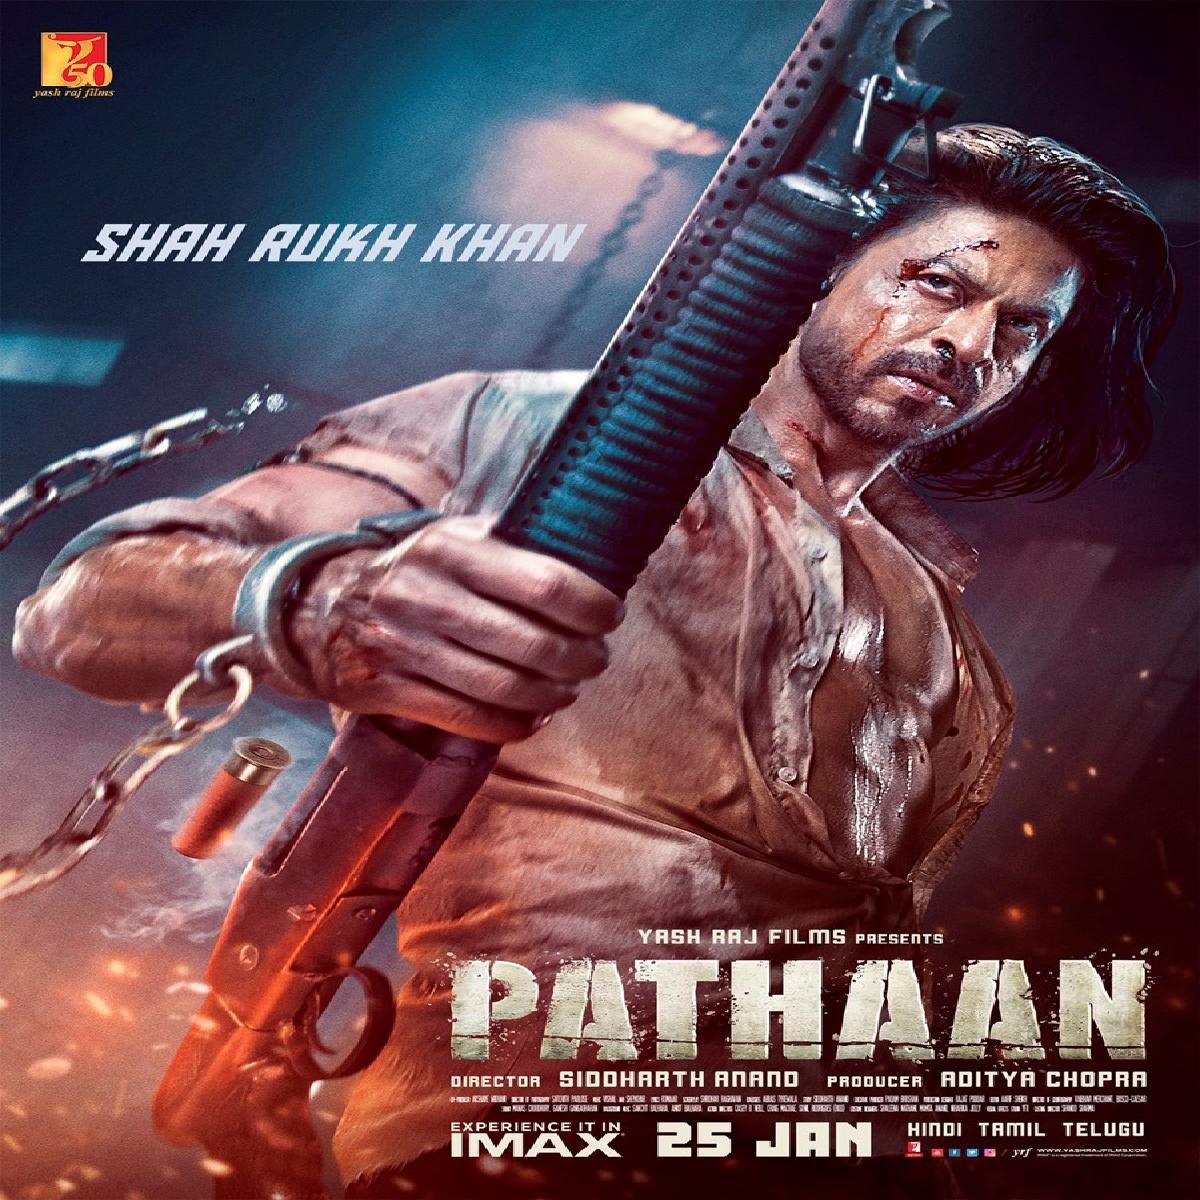 Pathaan Trailer Packs A Punch, Crosses 3.6 Million Within Hours of Its Release